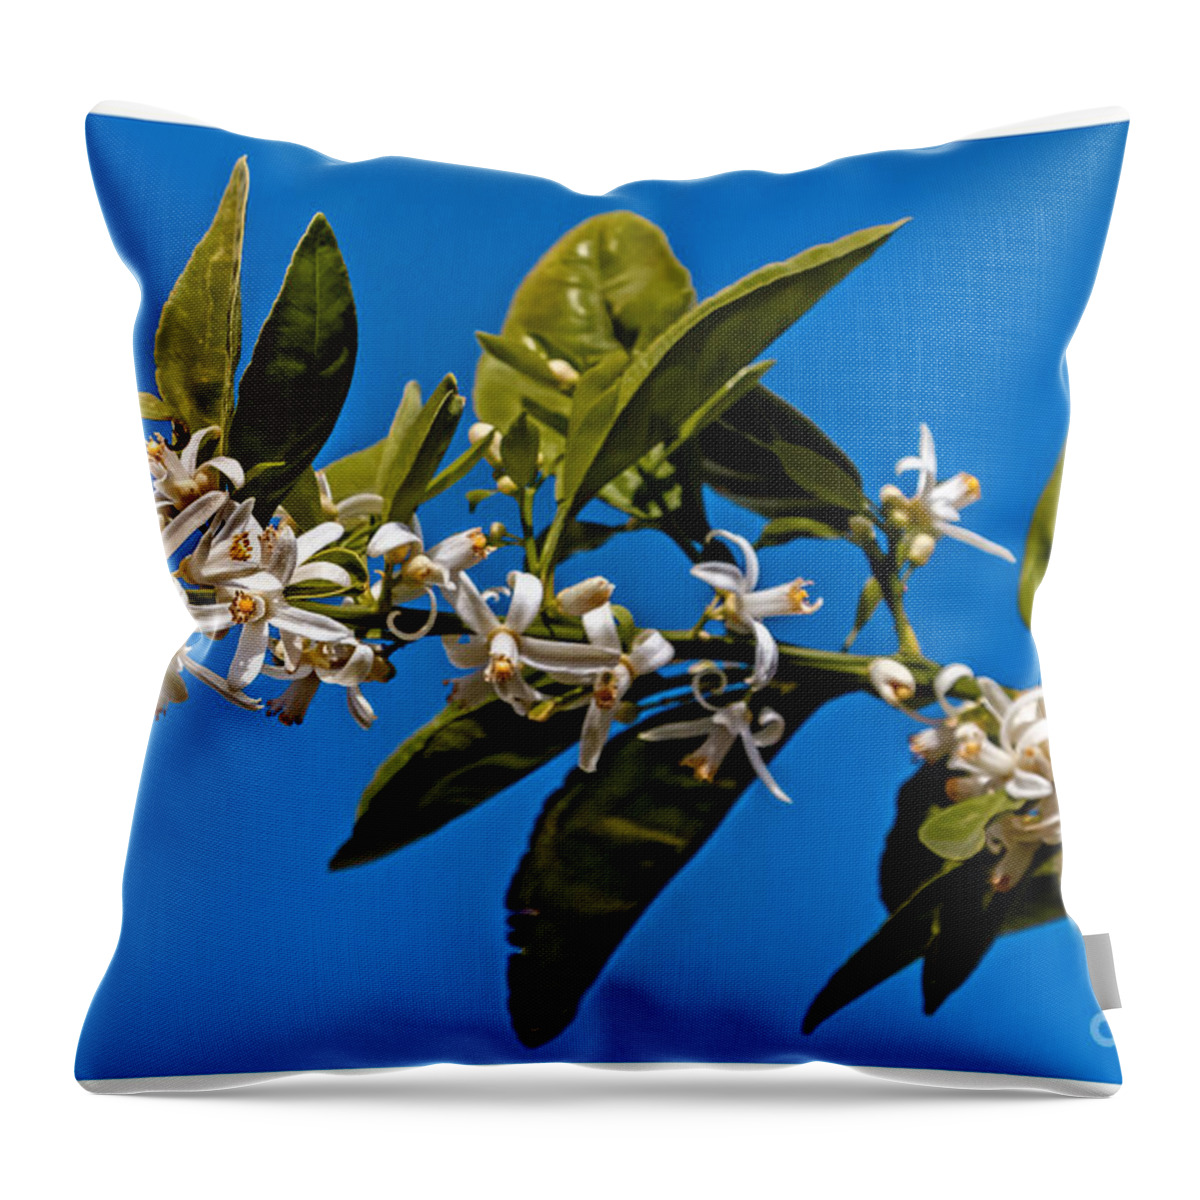 Arizona Throw Pillow featuring the photograph Orange Blossoms by Robert Bales